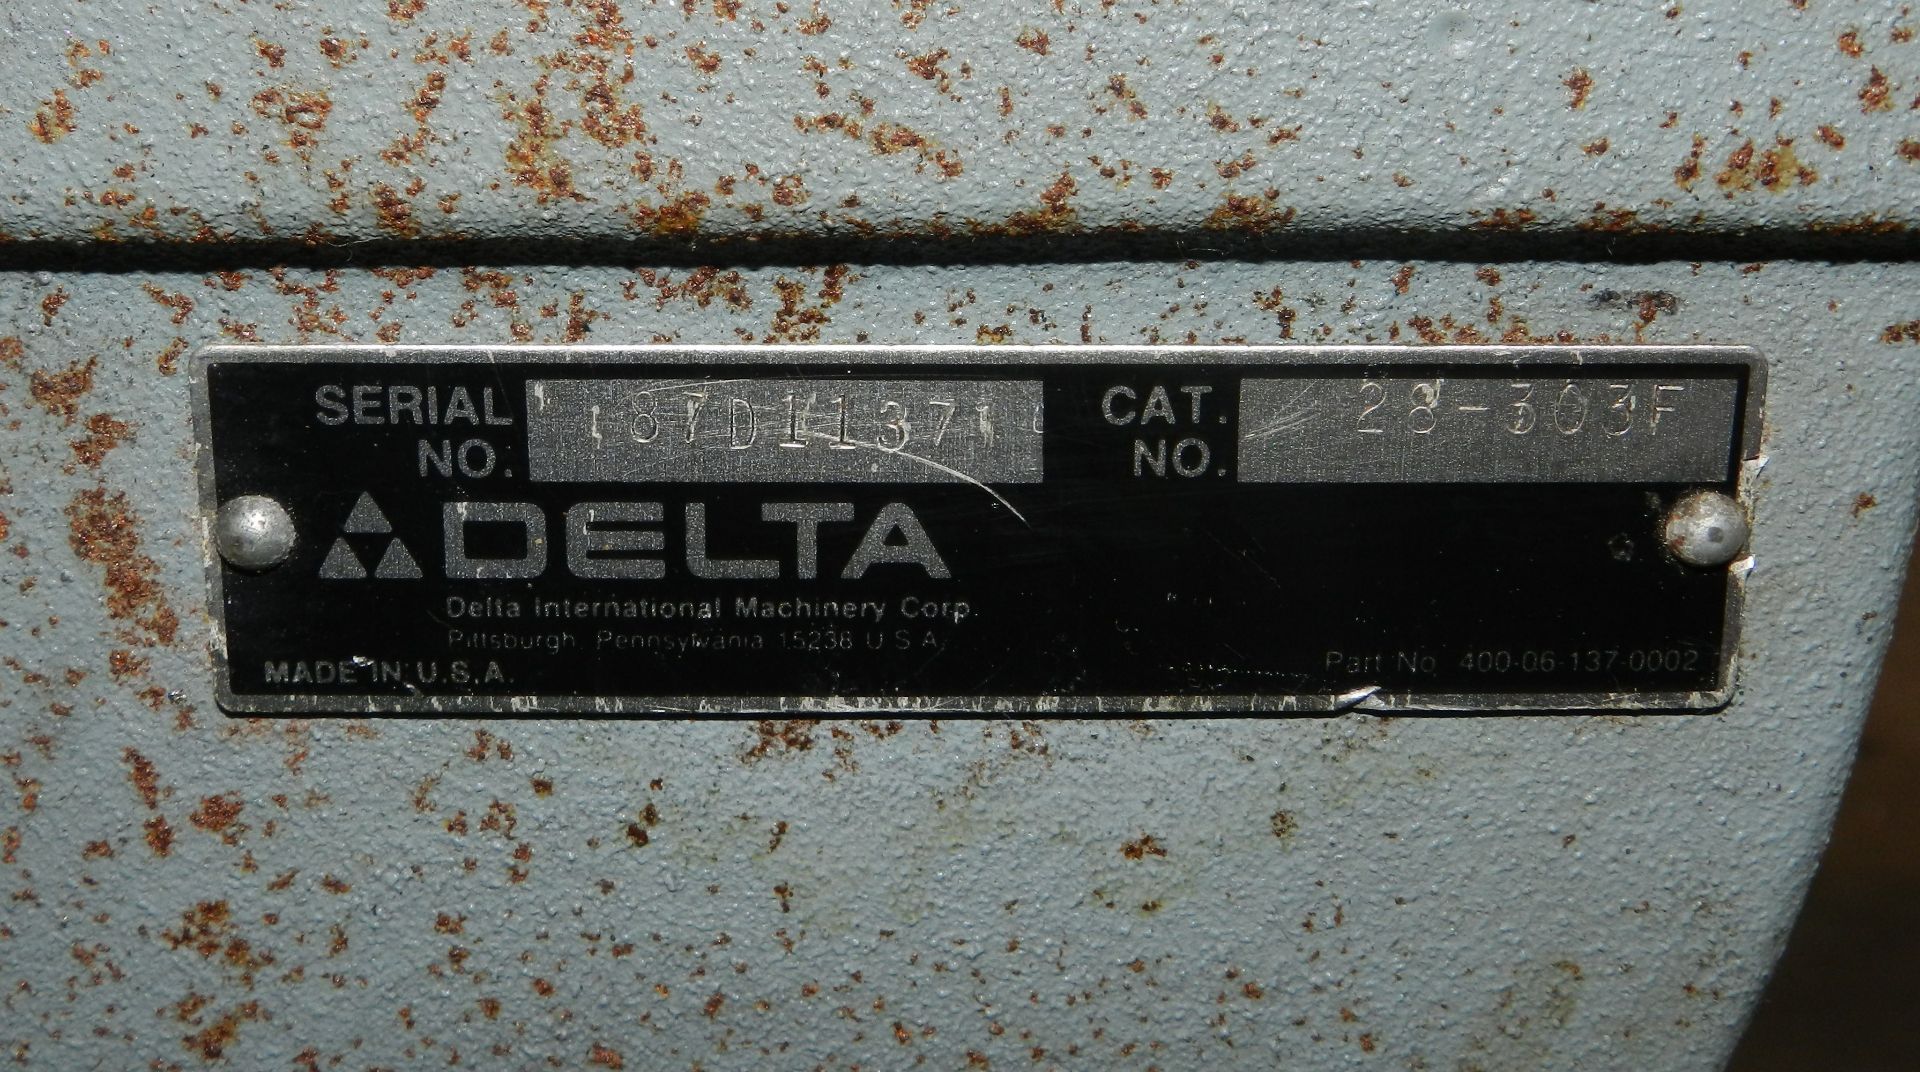 Delta 28-303F 14"" Metal/Wood Vertical Band Saw 3/4HP - Image 7 of 11